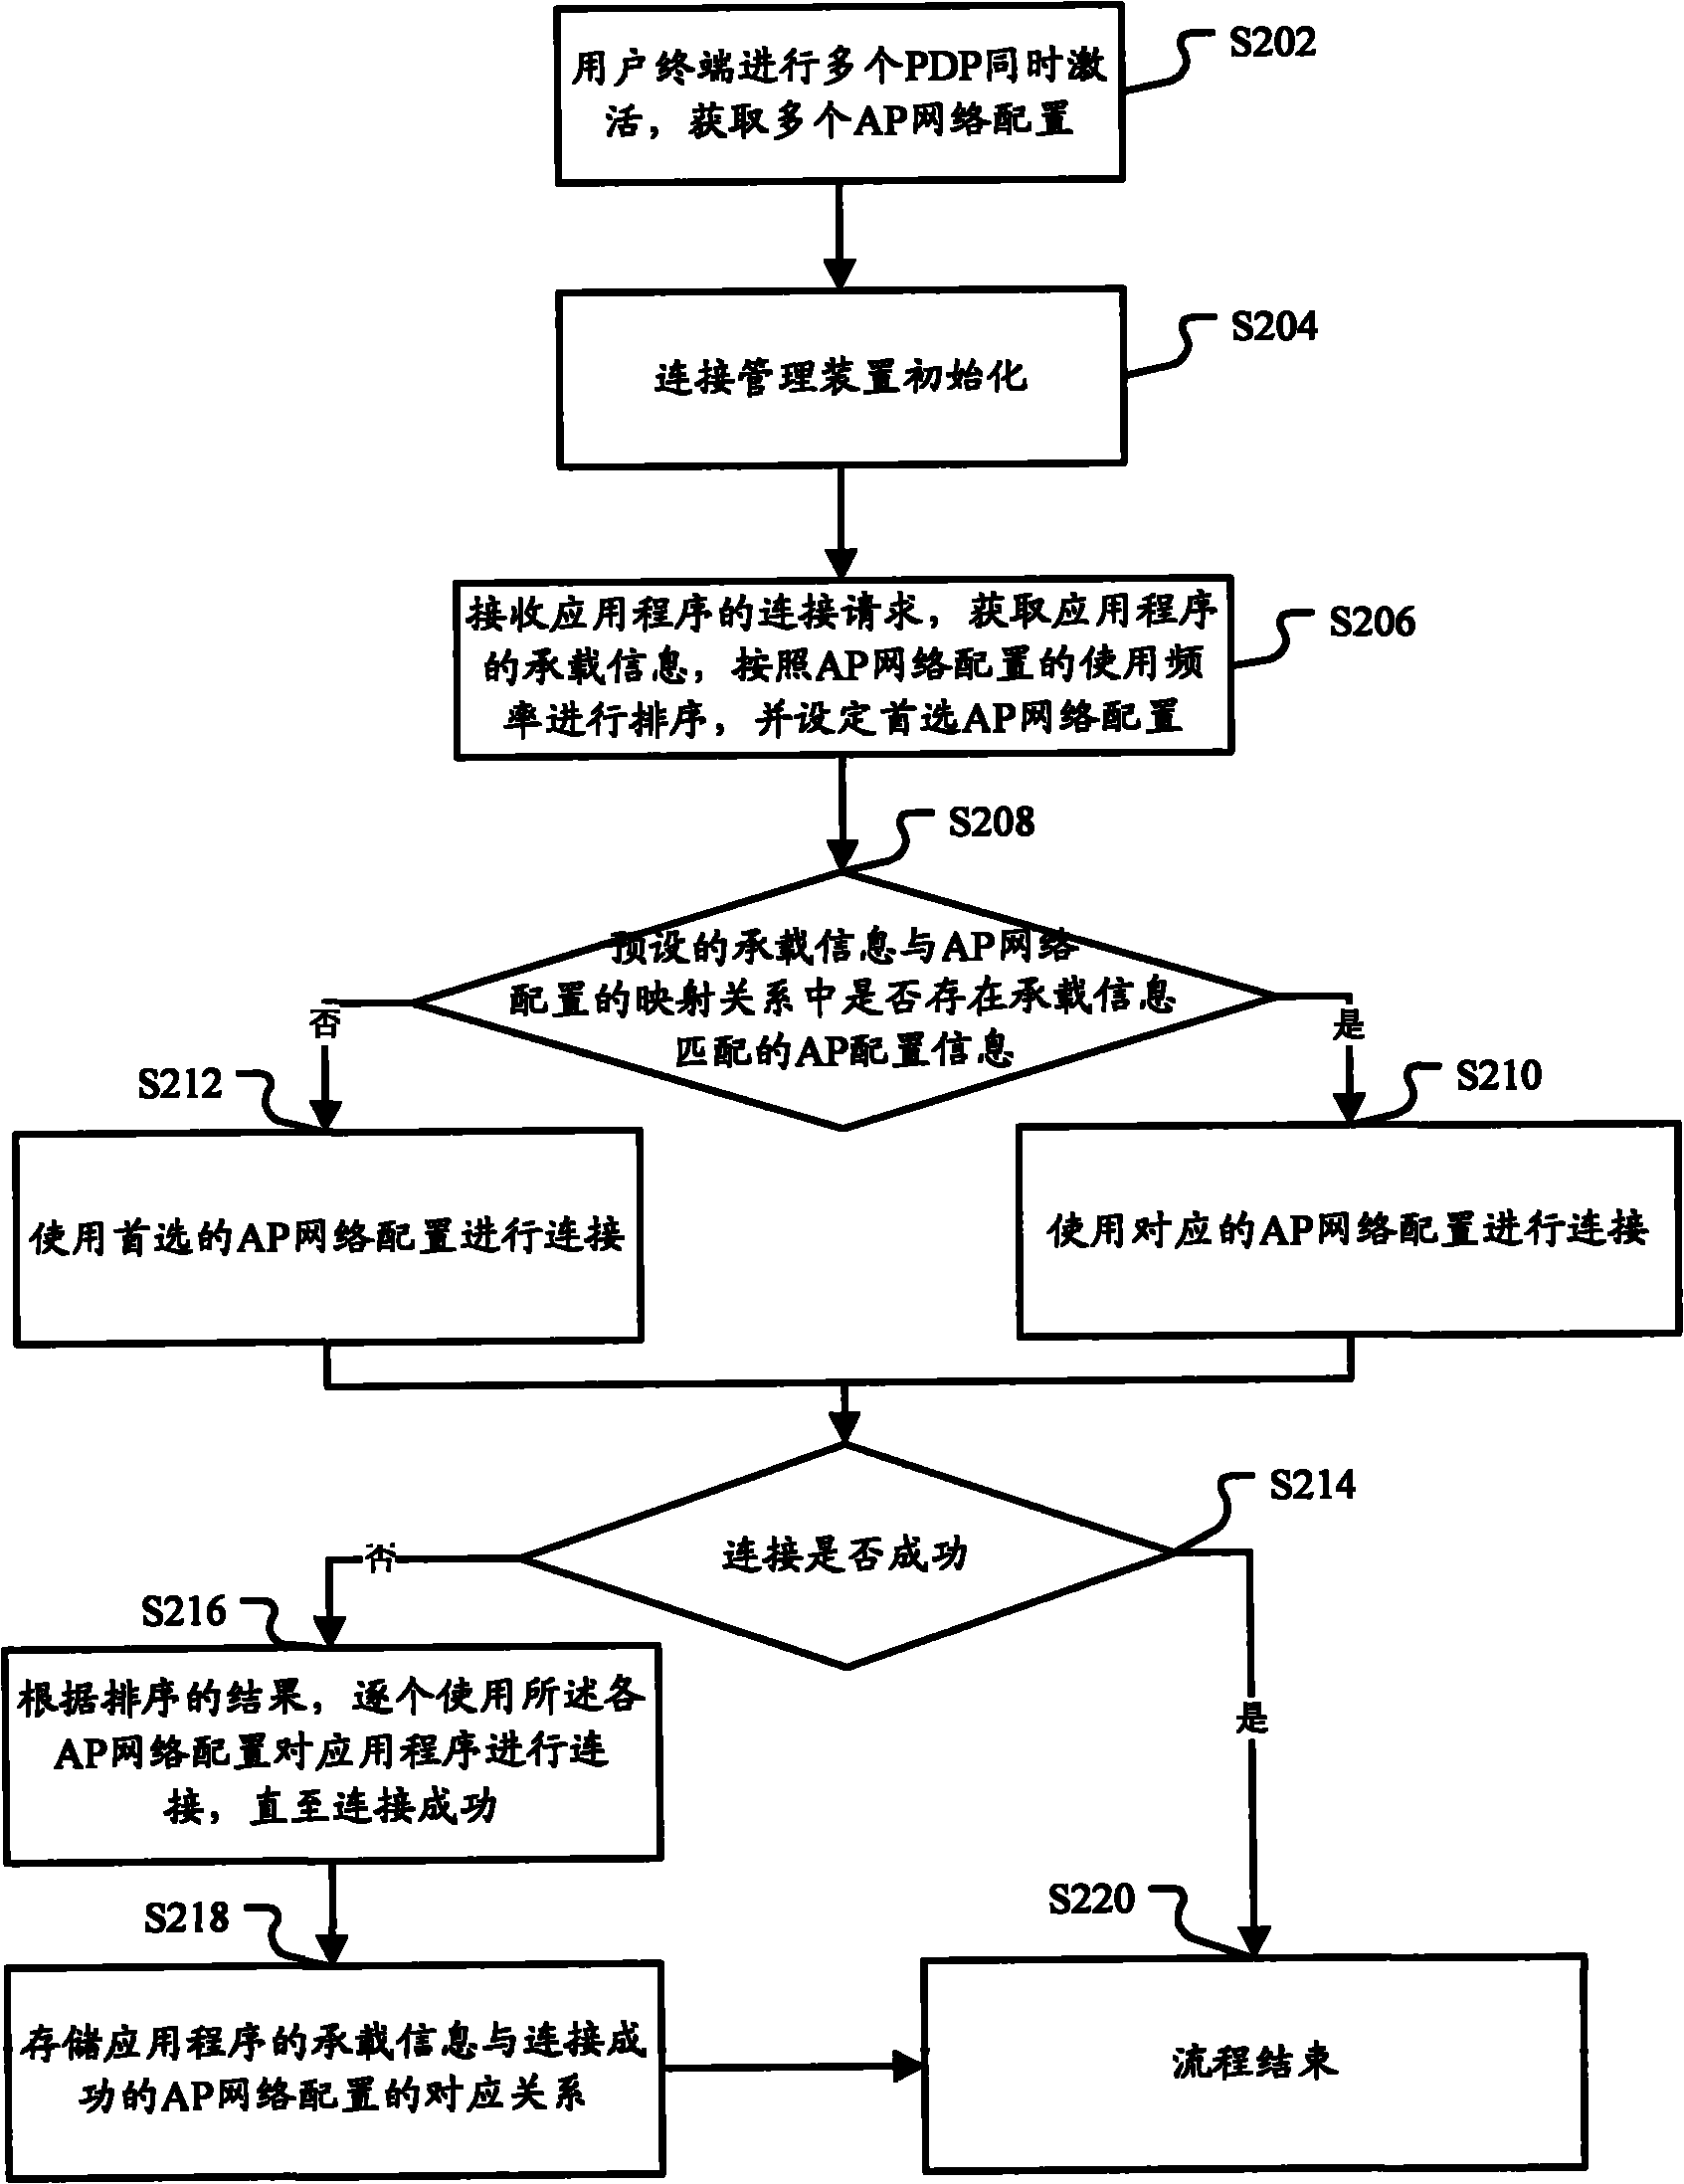 Method and device for connecting and managing multiple APs (access points)